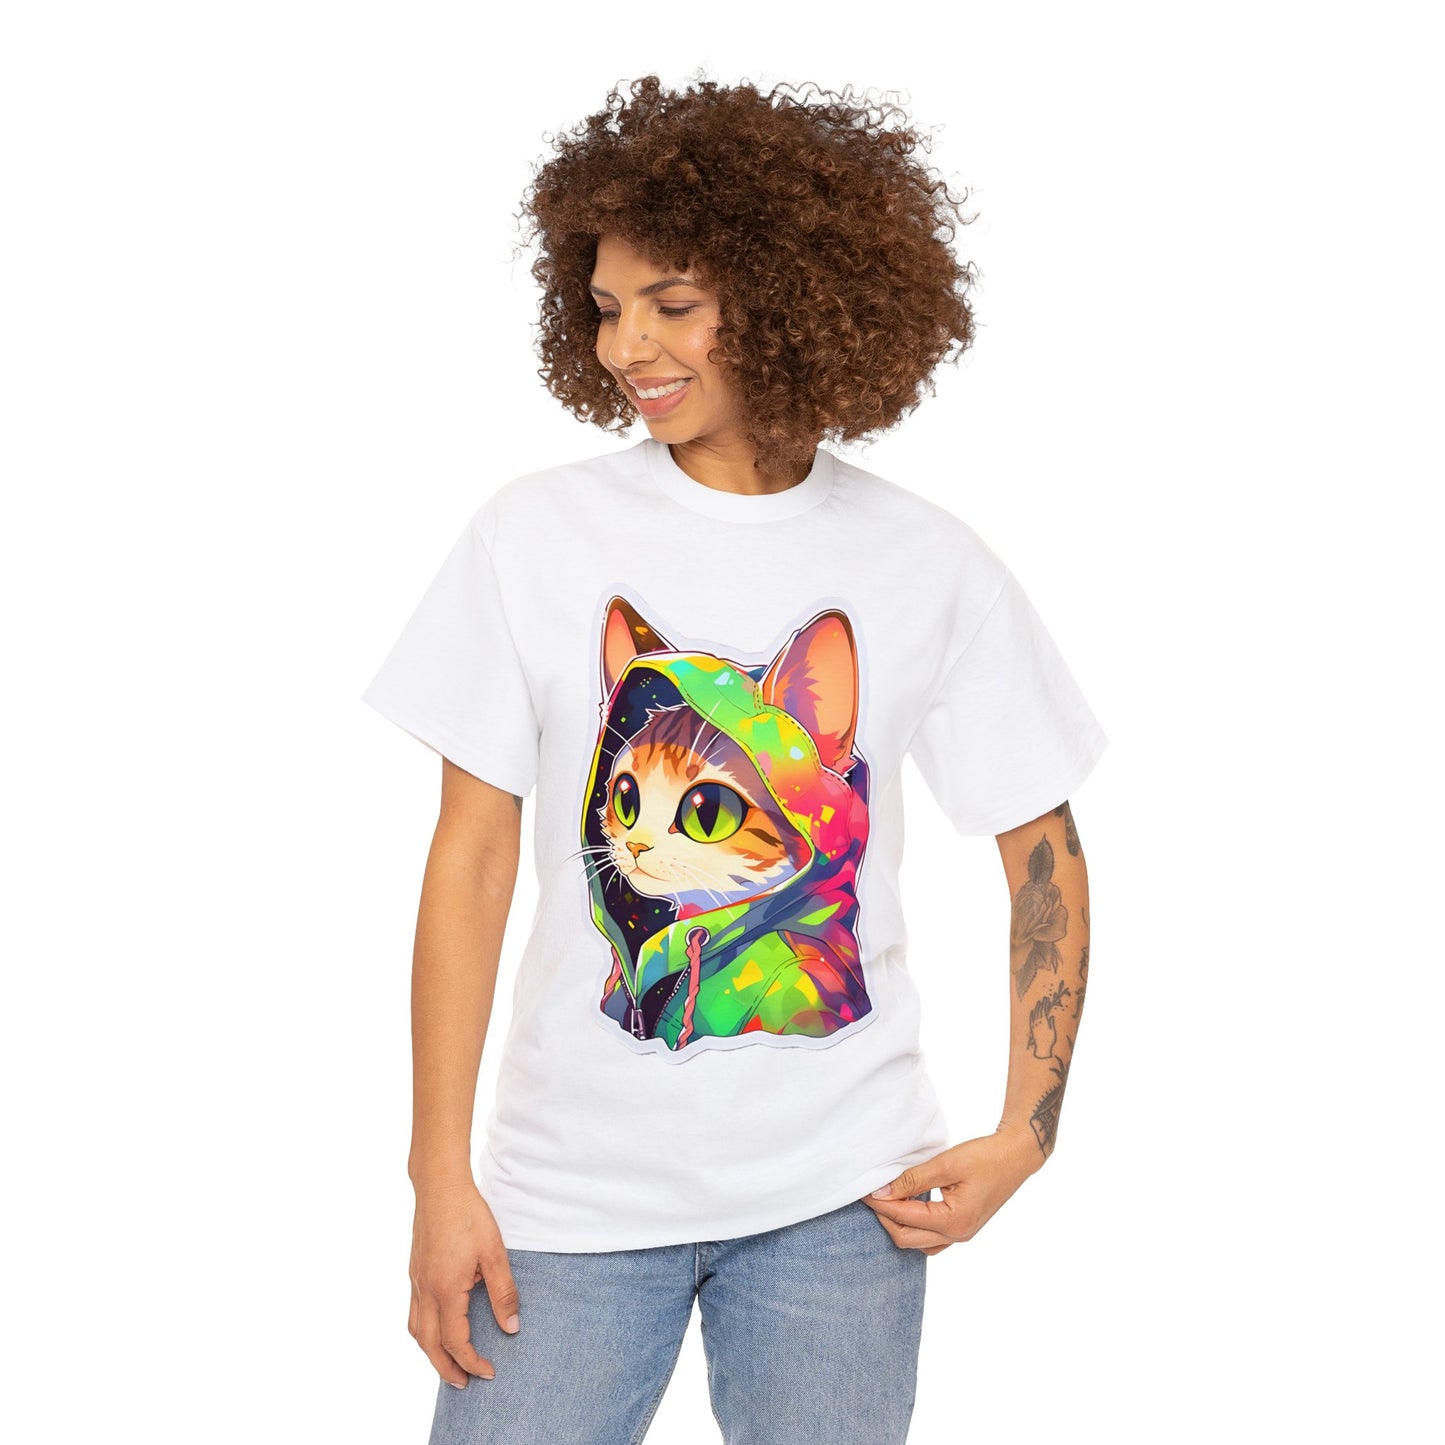 Robin-Hood Red and Green Hoodie Cat Unisex Cotton Tee